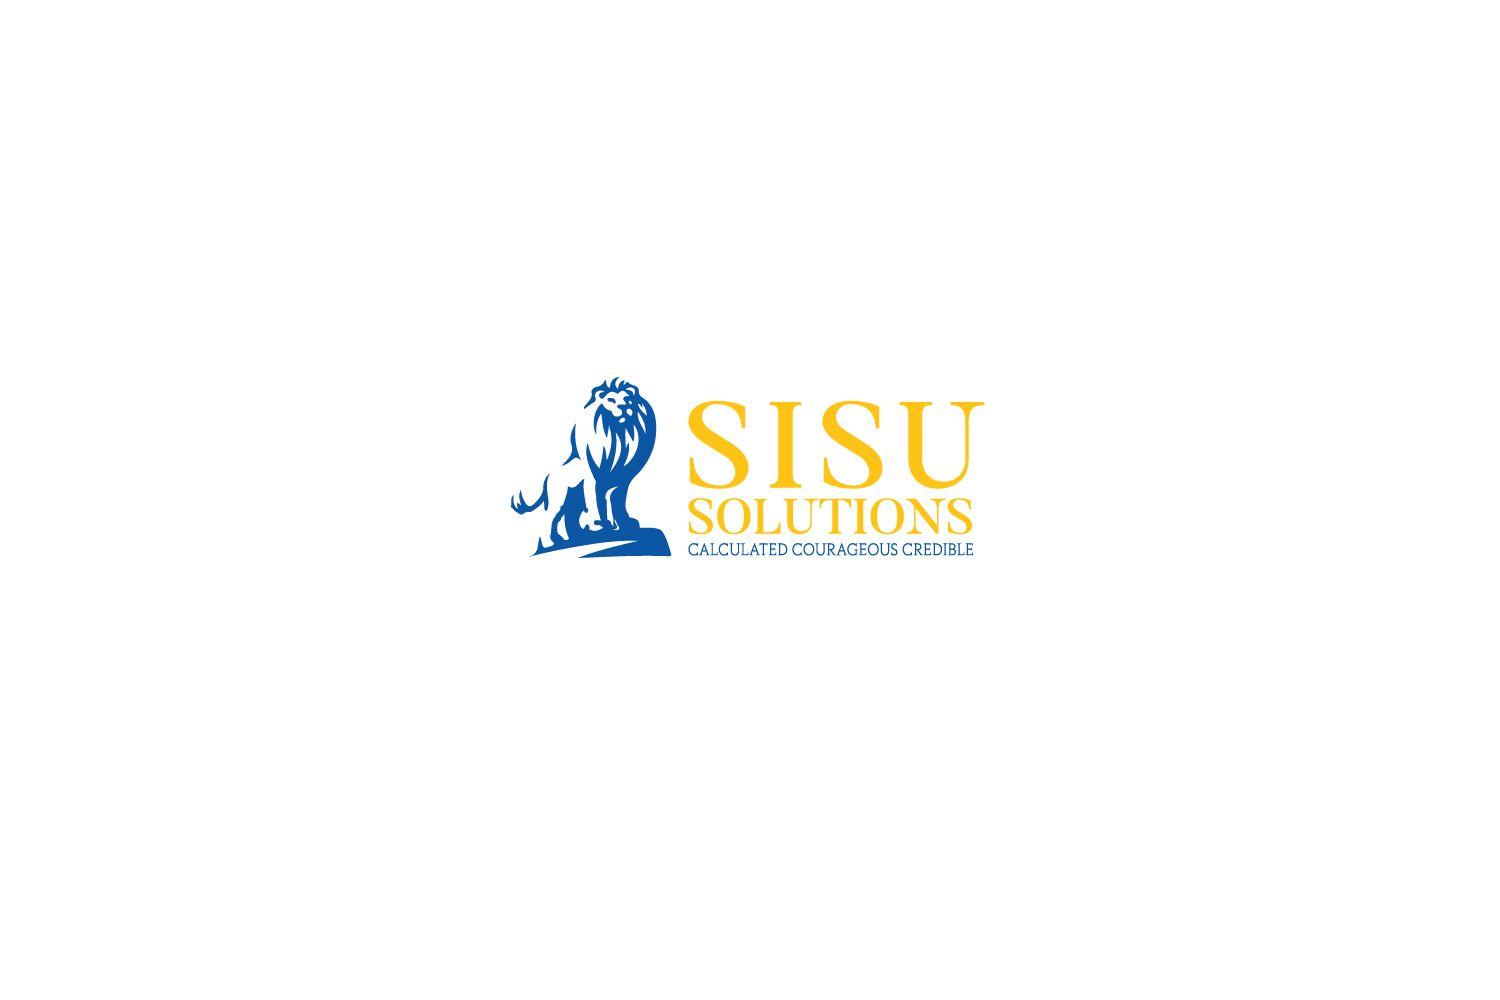 Credible Logo - Serious, Masculine, Investment Logo Design for Sisu Solutions ...